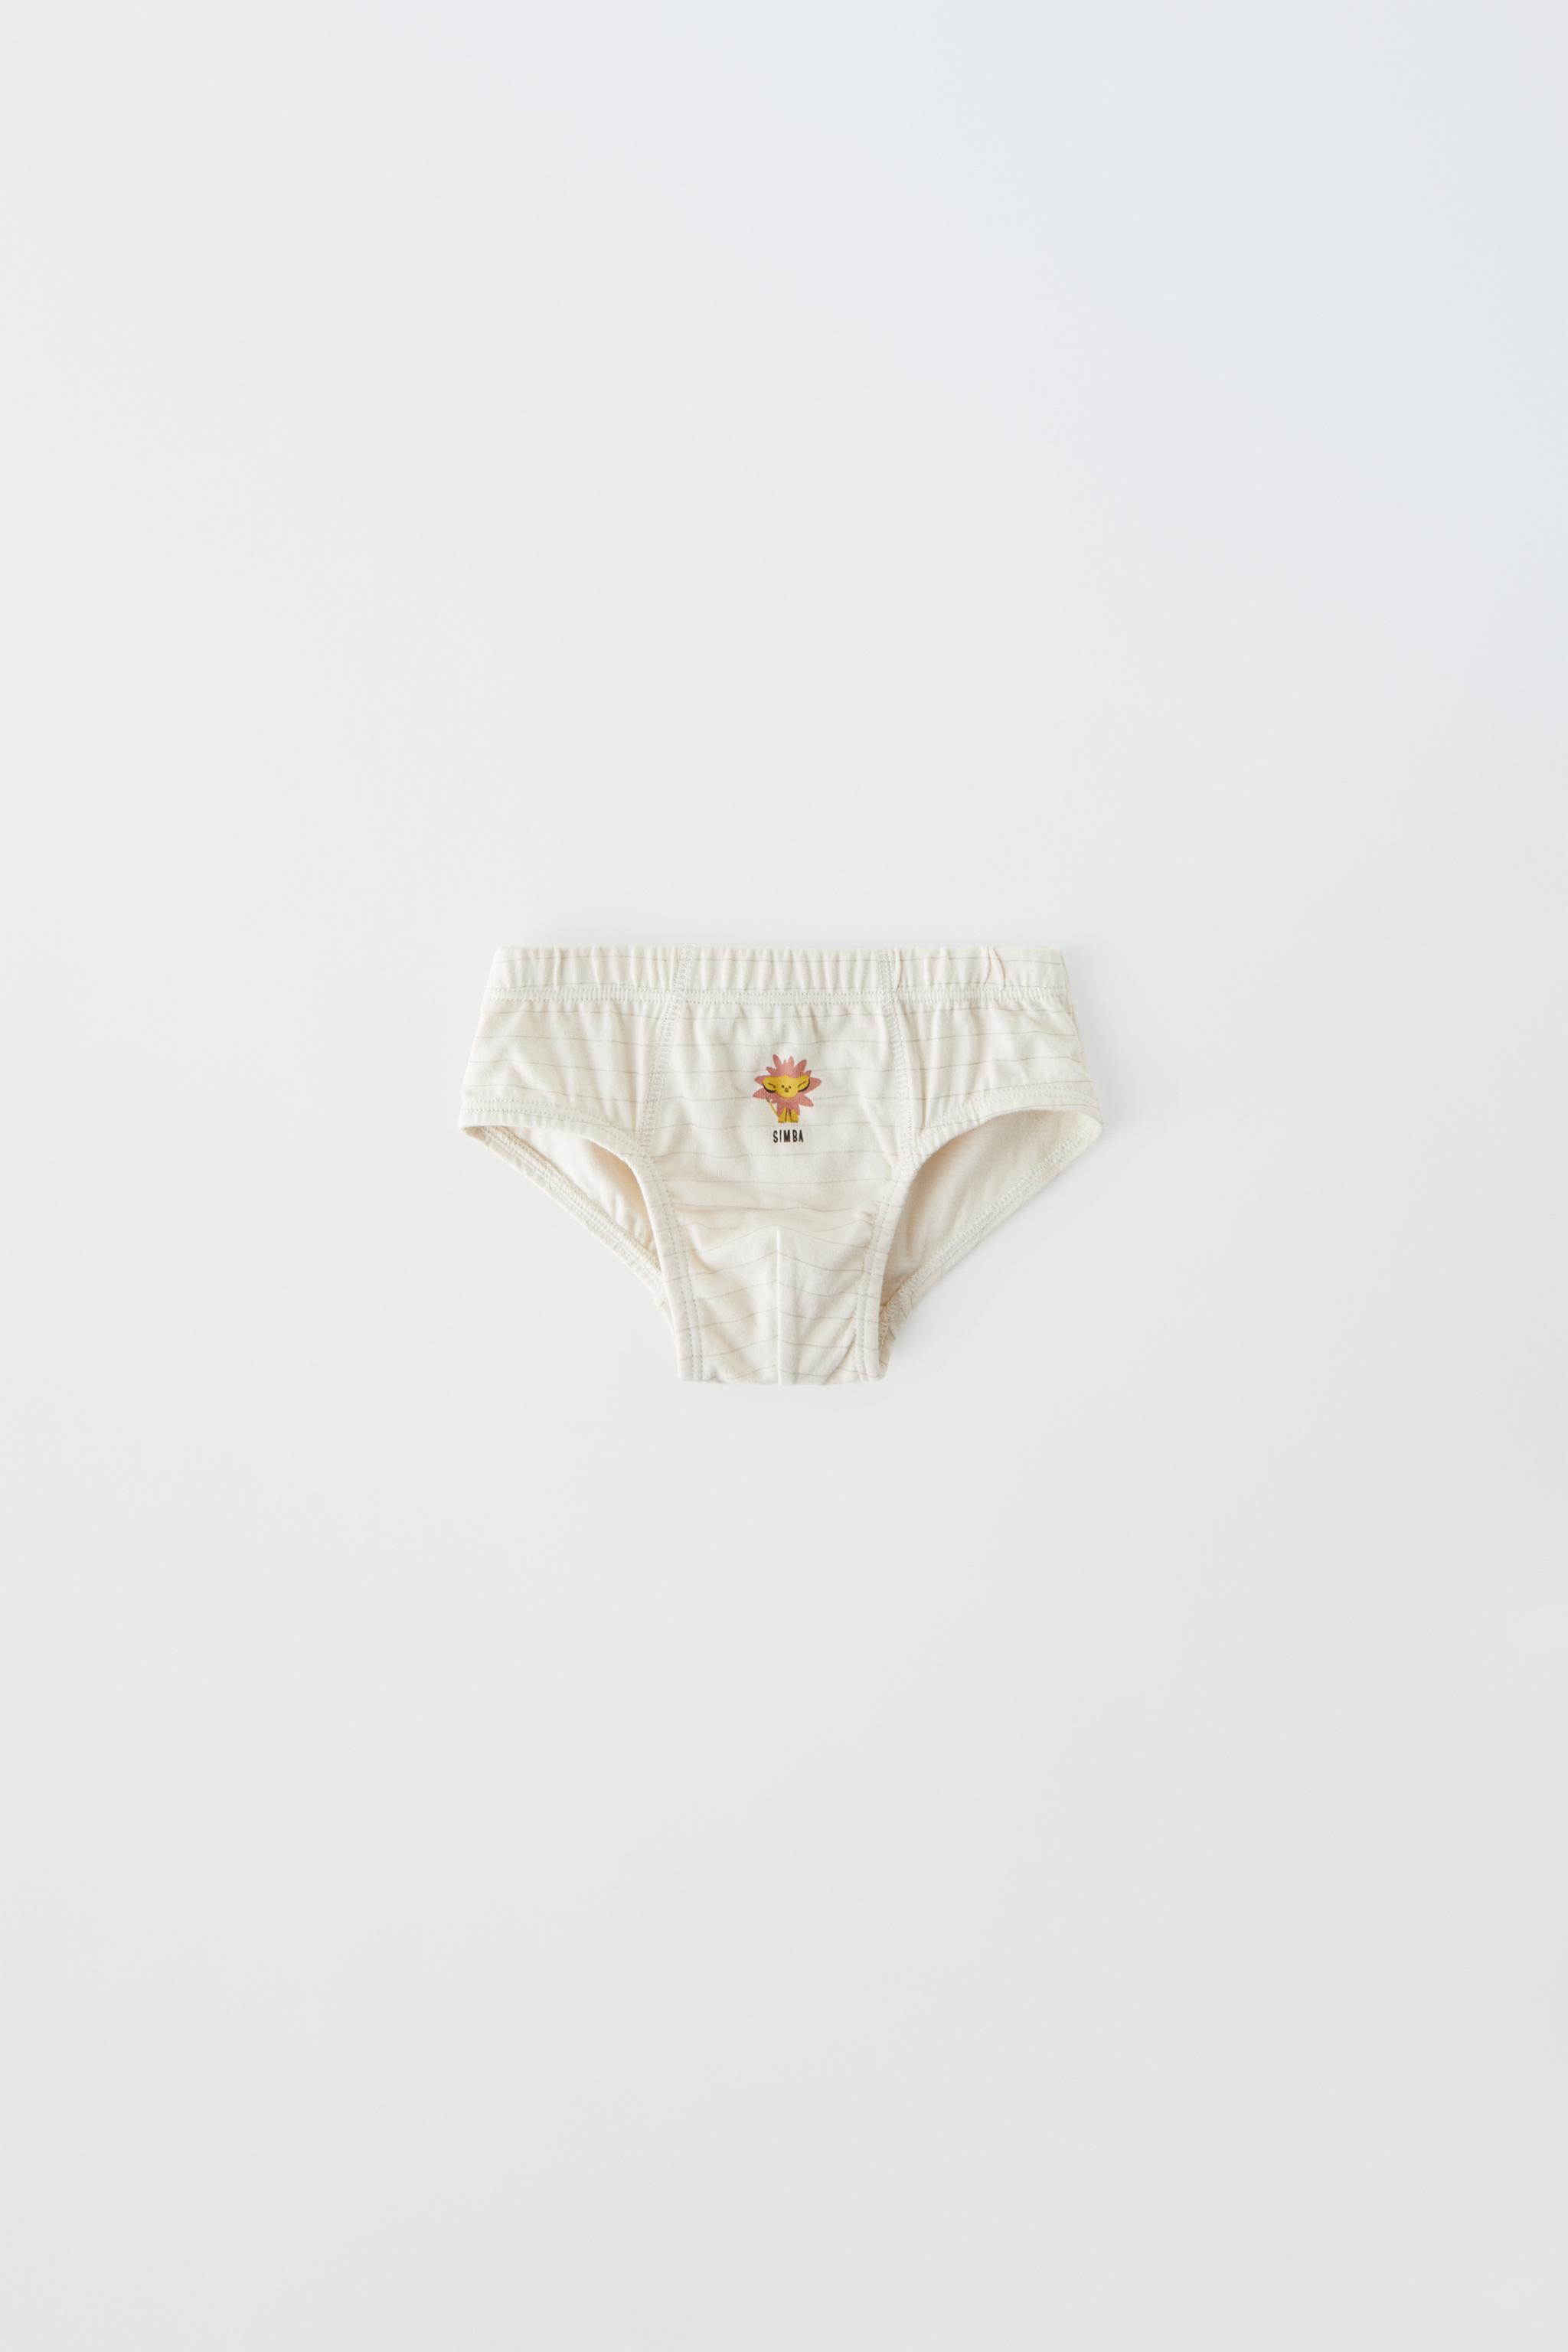 Zara 1-6 YEARS/ THREE PACK OF MICKEY MOUSE AND FRIENDS © DISNEY UNDERWEAR